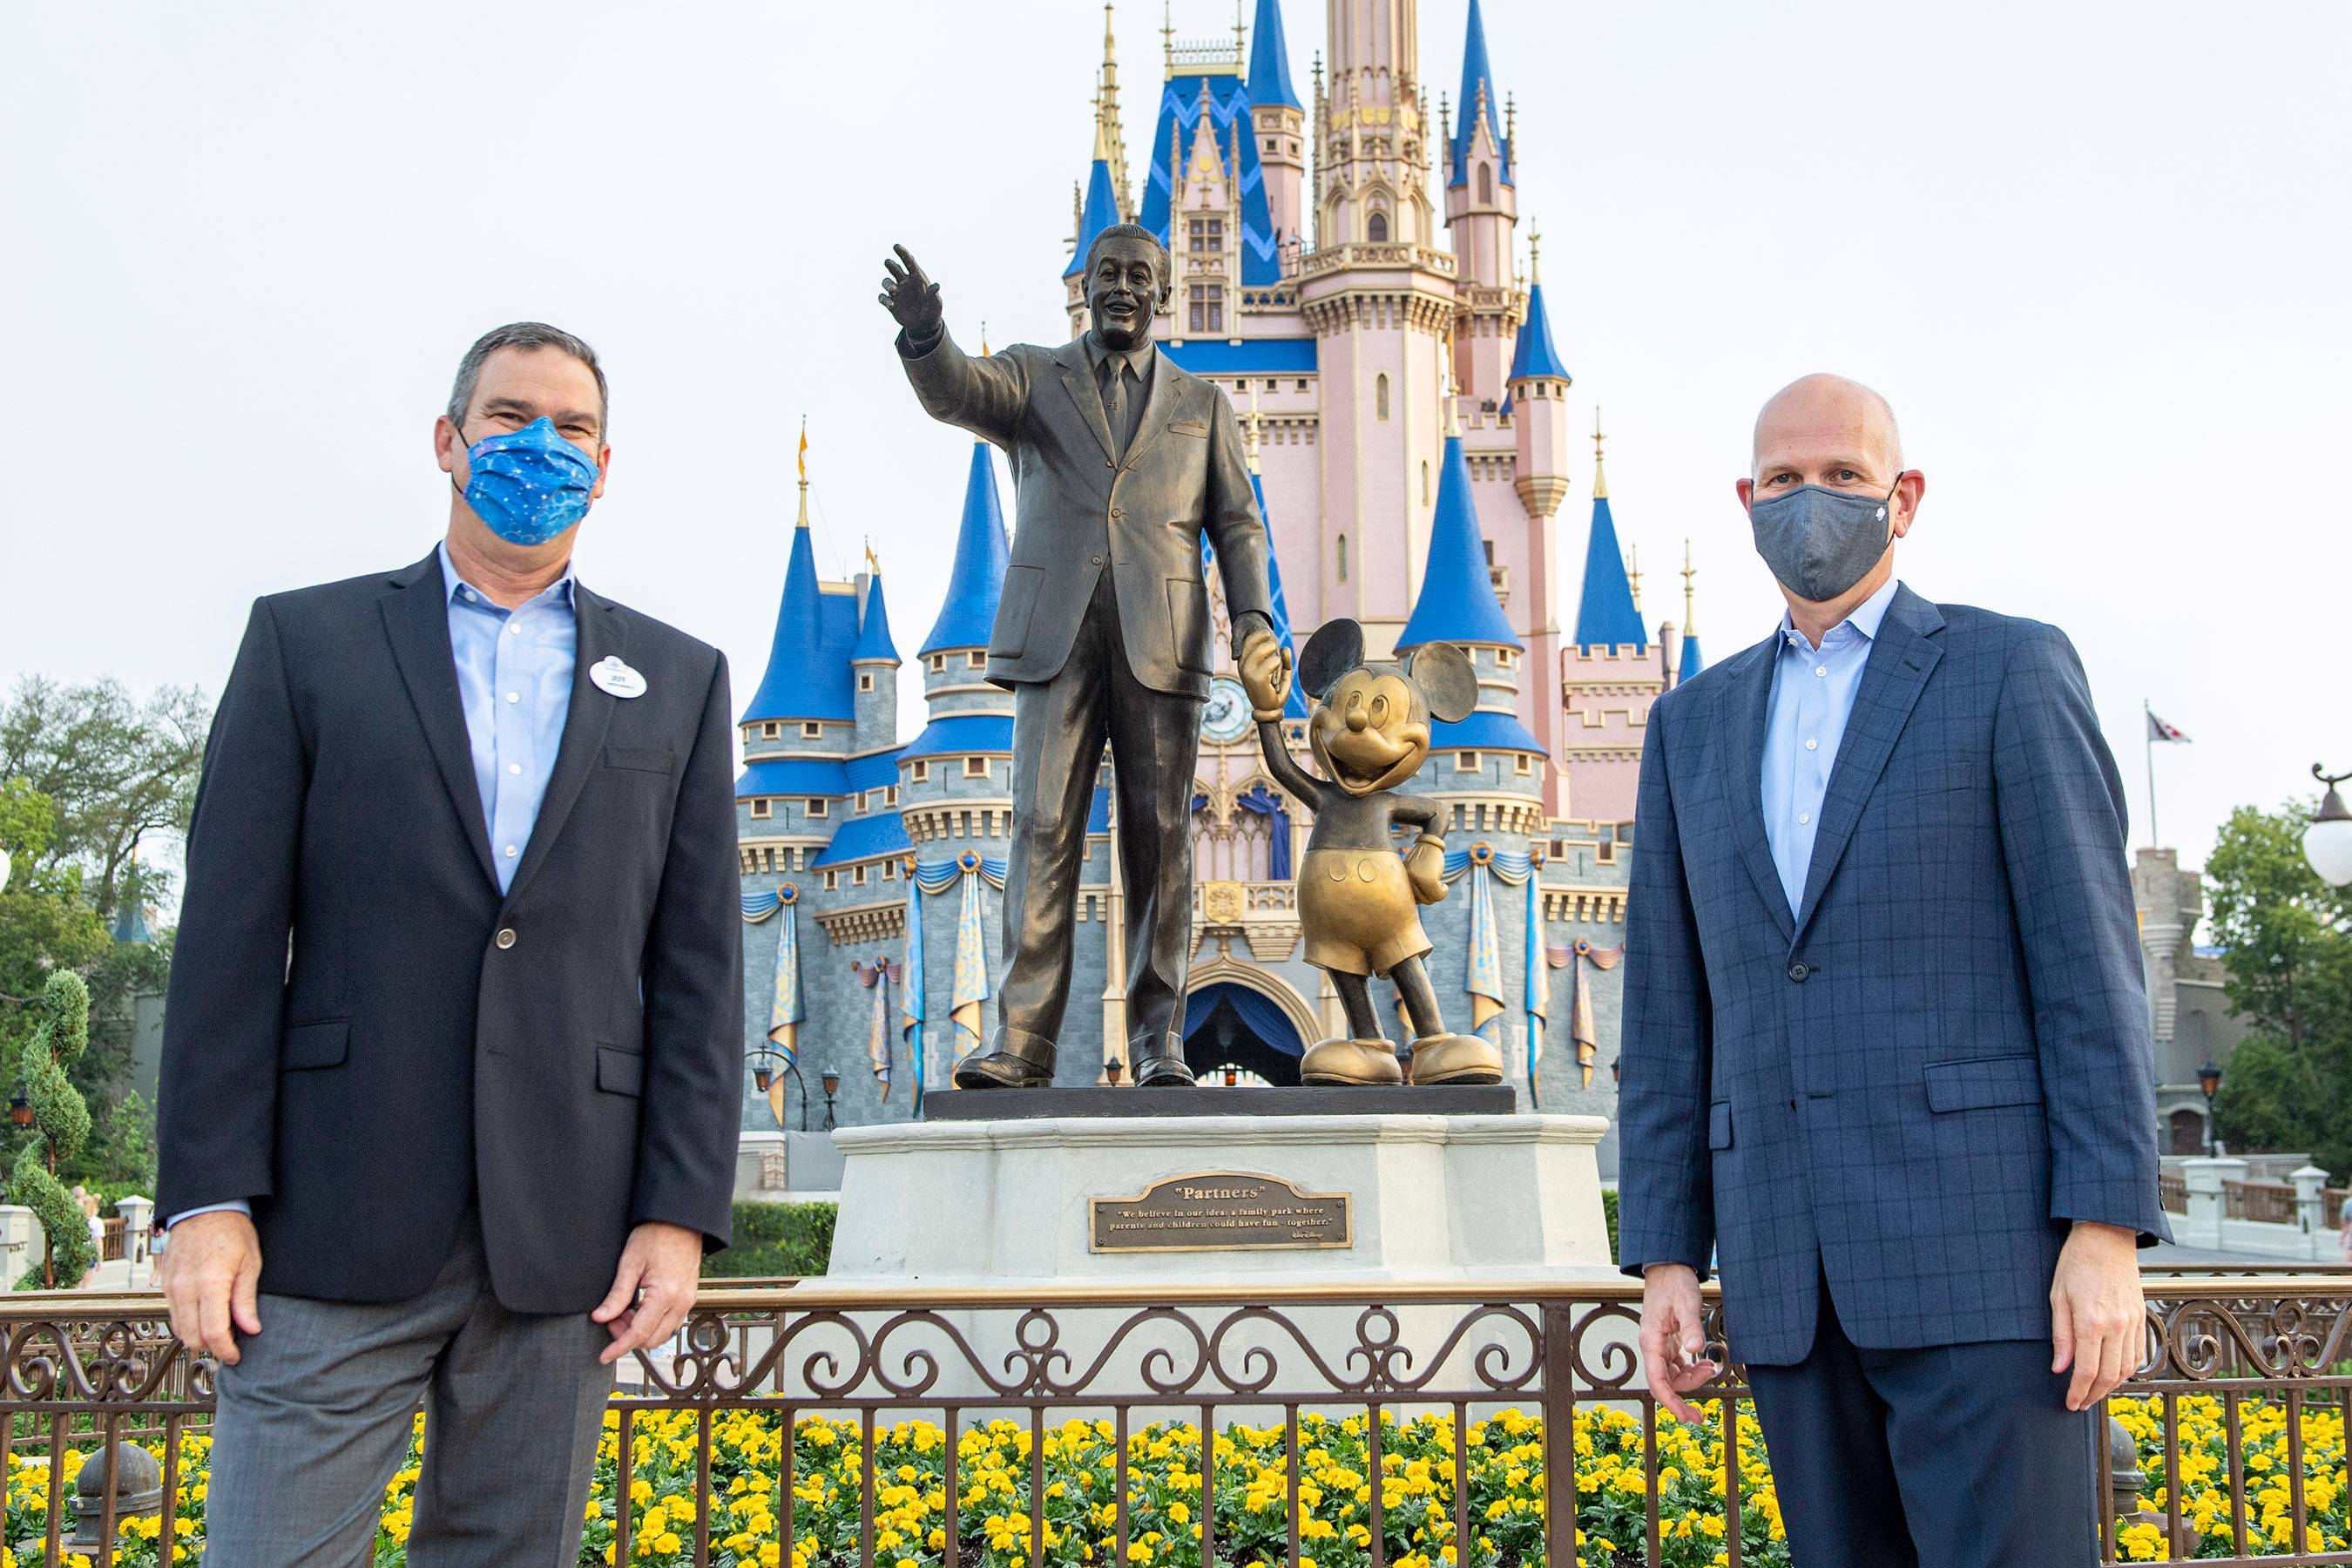 Walt Disney World President Jeff Vahle and AdventHealth CEO Terry Shaw